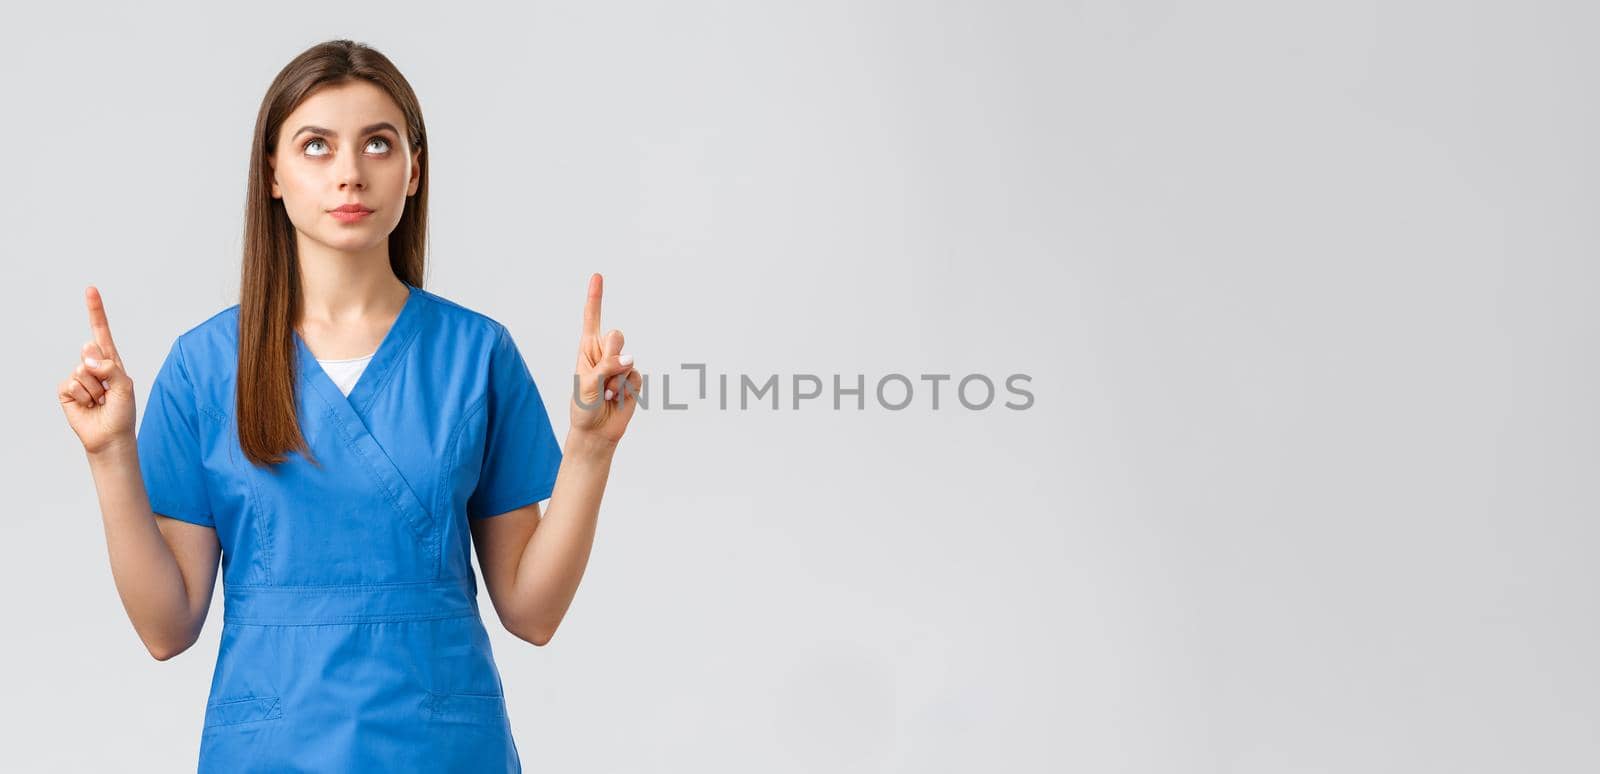 Healthcare workers, prevent virus, covid-19 test screening, medicine concept. Concerned, serious and focused female doctor or nurse in blue scrubs, pointing fingers and looking up at banner.